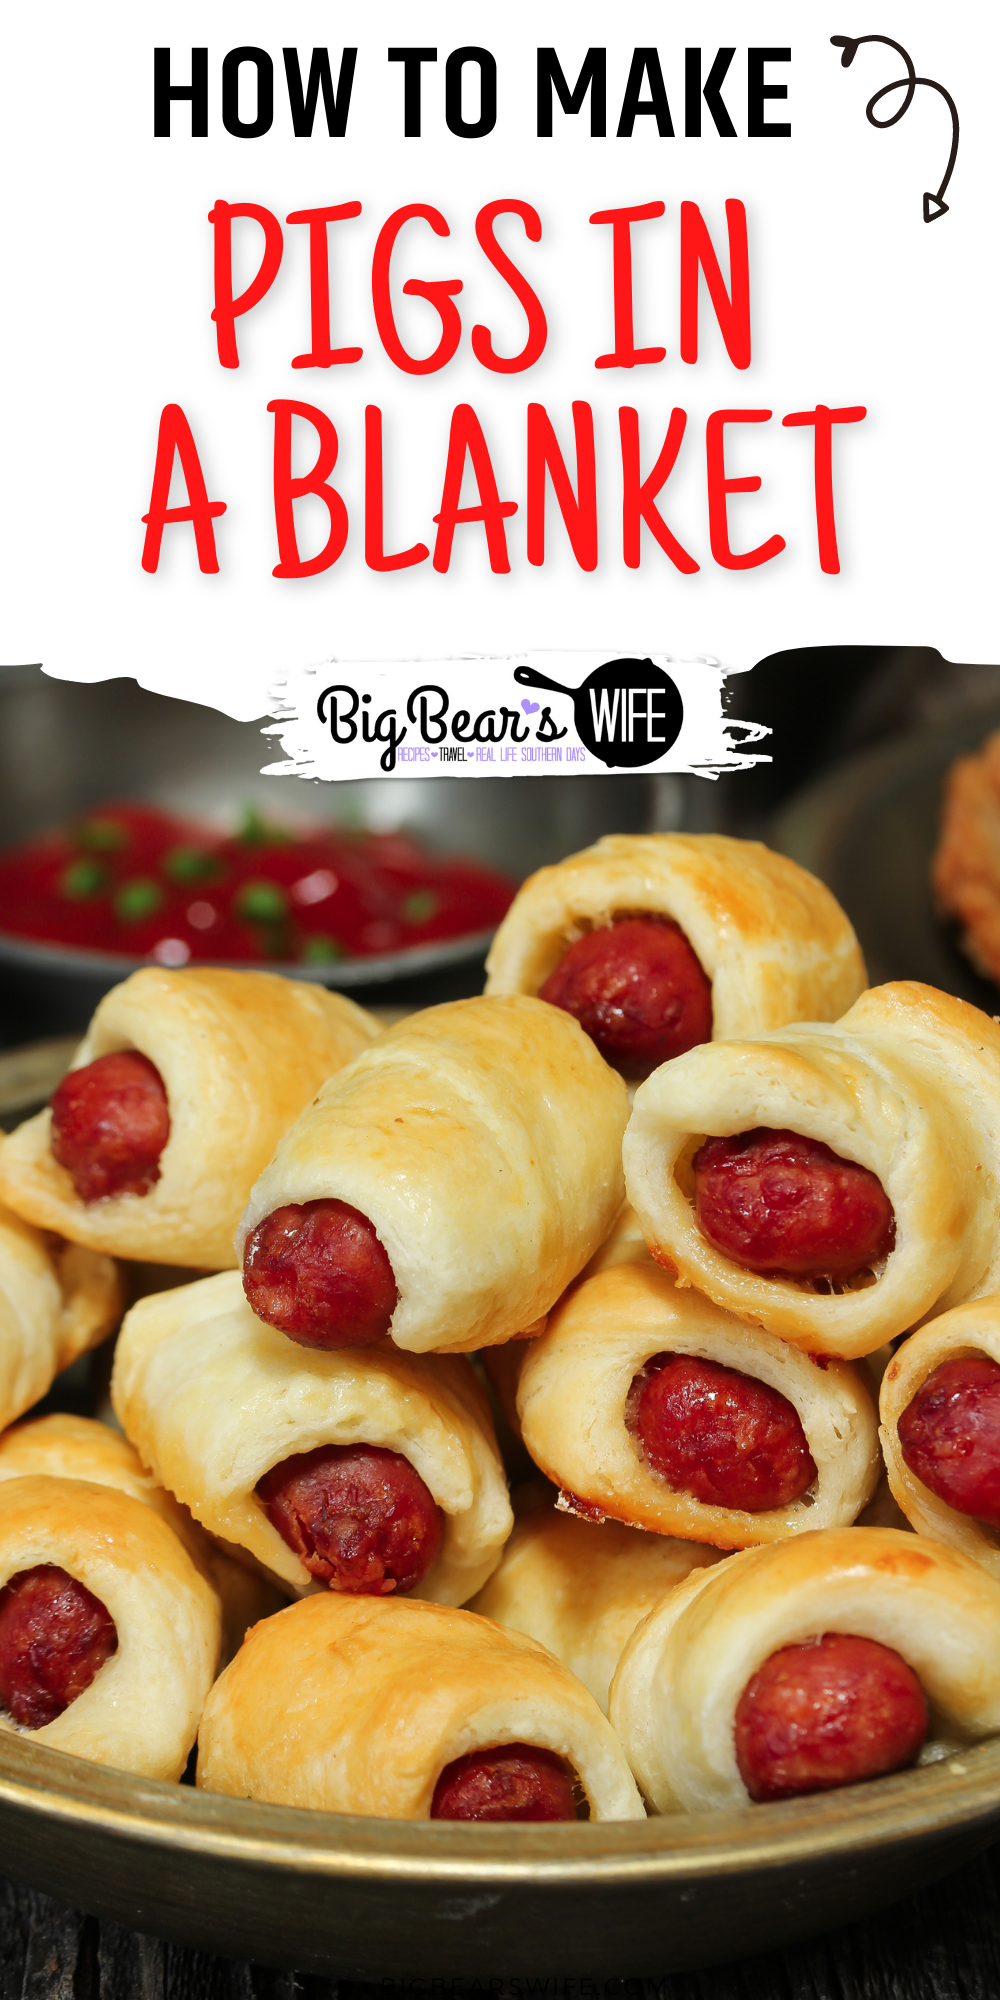 Pigs in a Blanket are super easy to make and every always loves them at cookouts and parties! Hot Dogs, Crescent Rolls and the Oven are all you need to make these classic finger food bites! via @bigbearswife